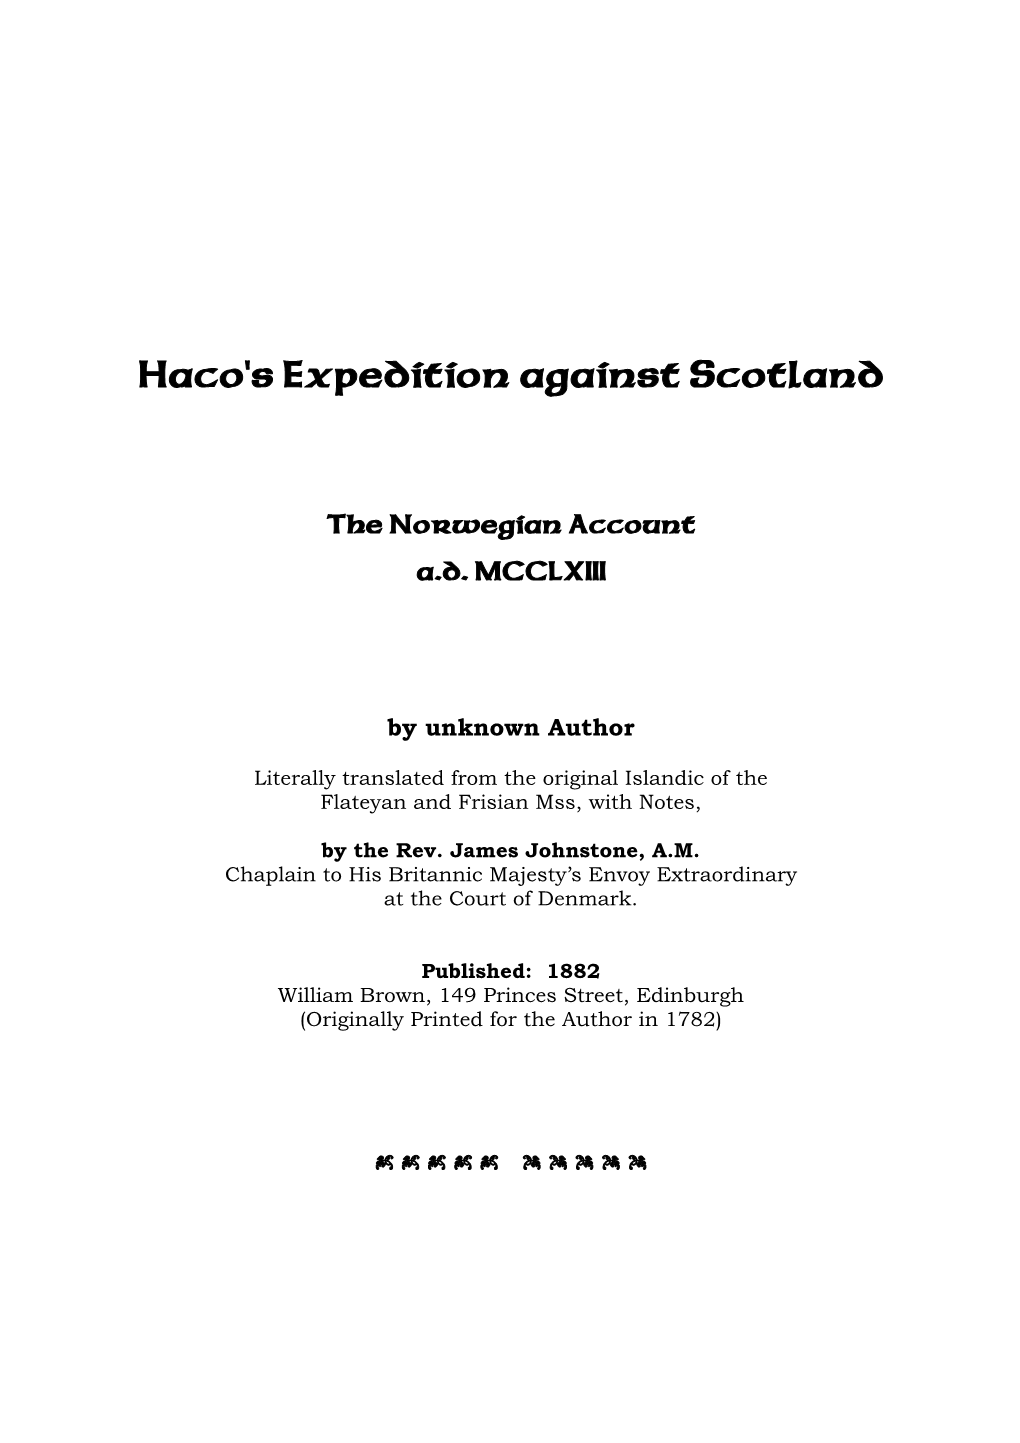 Haco's Expedition Against Scotland